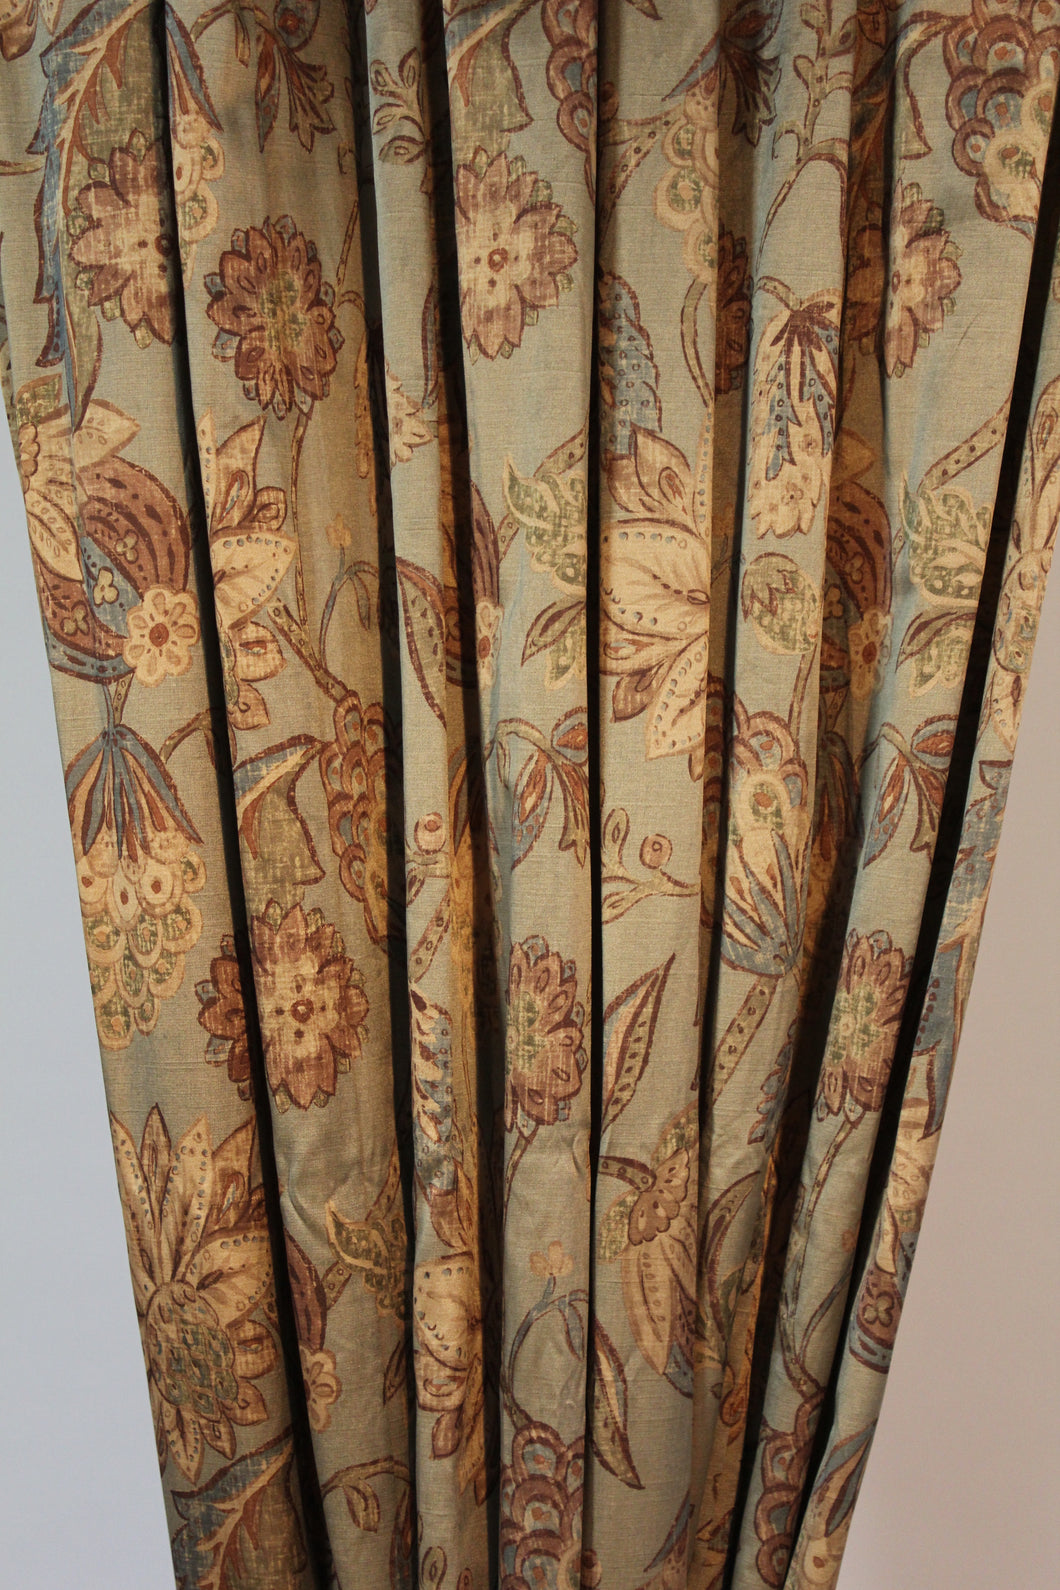 9020 - Vintage/Classic Drapery - Muted Tones, Floral Print - French Pleat